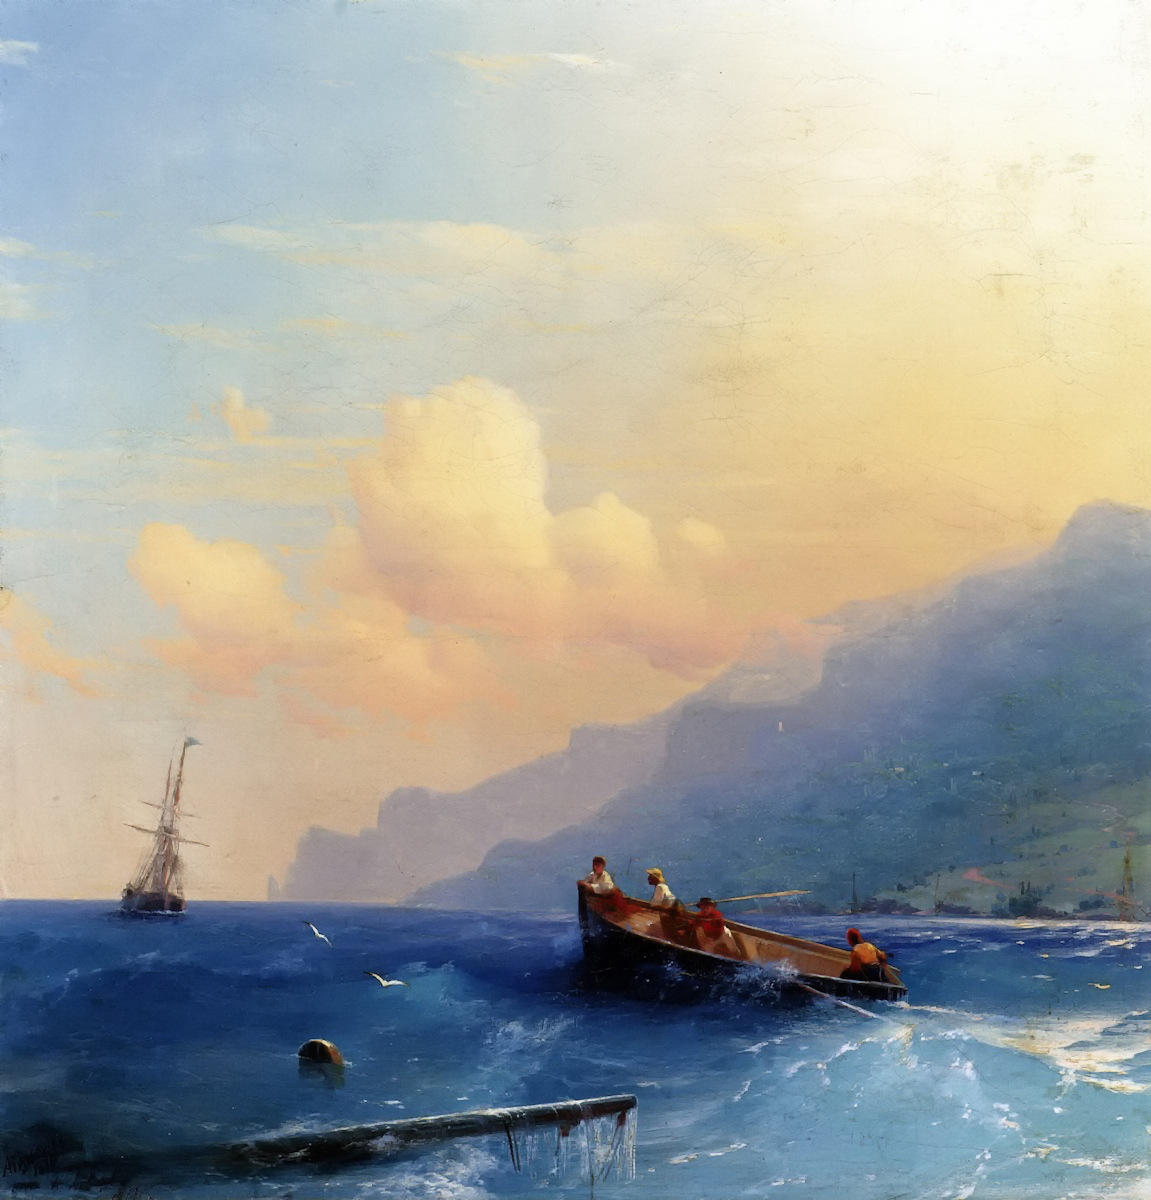 Searching for Suvivors by Ivan Aivazovsky, 1870